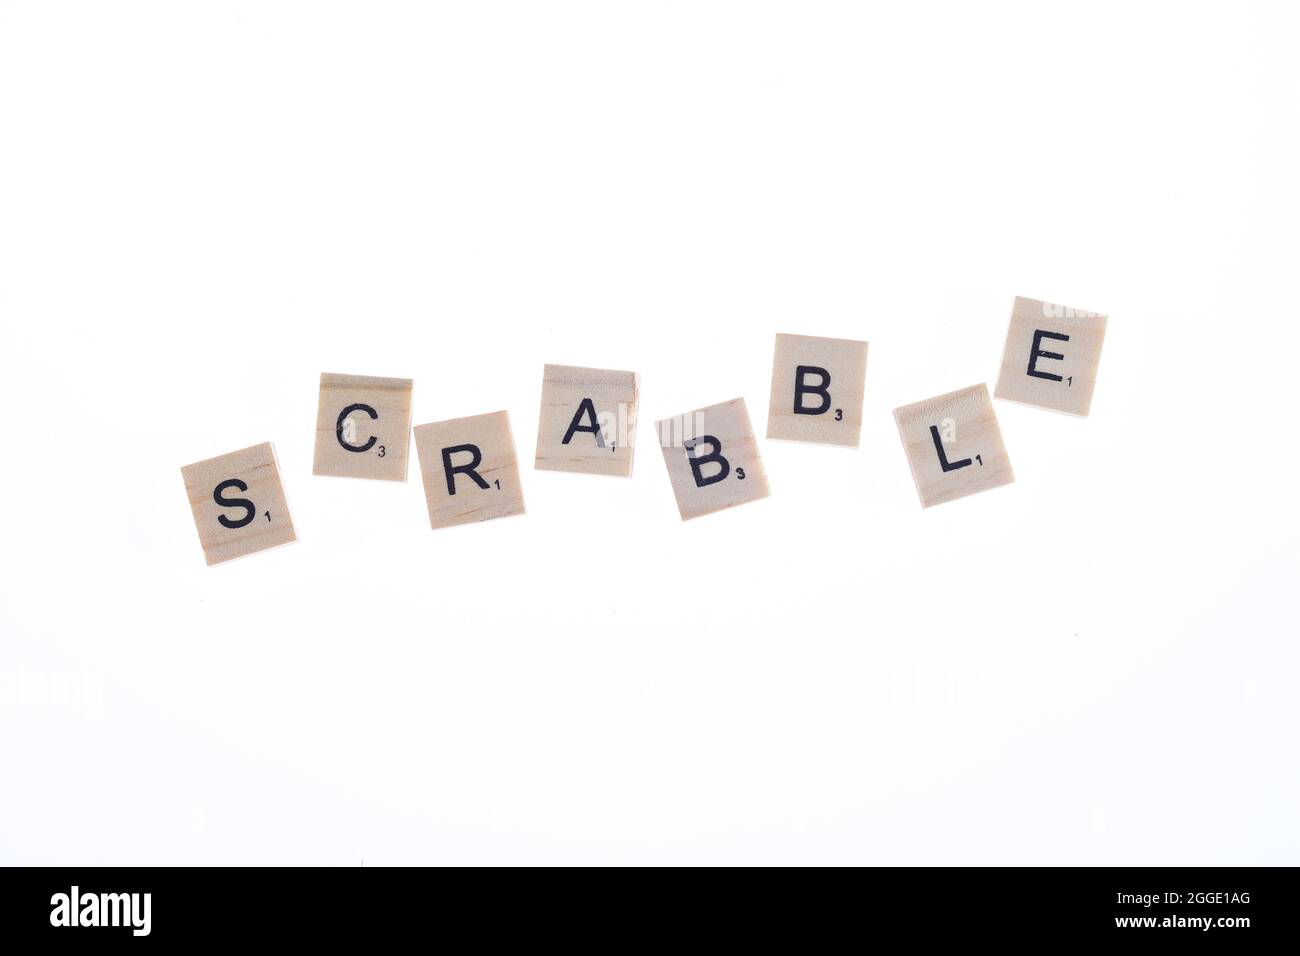 Word scrabble arranged from wooden blocks on white background. Stock Photo